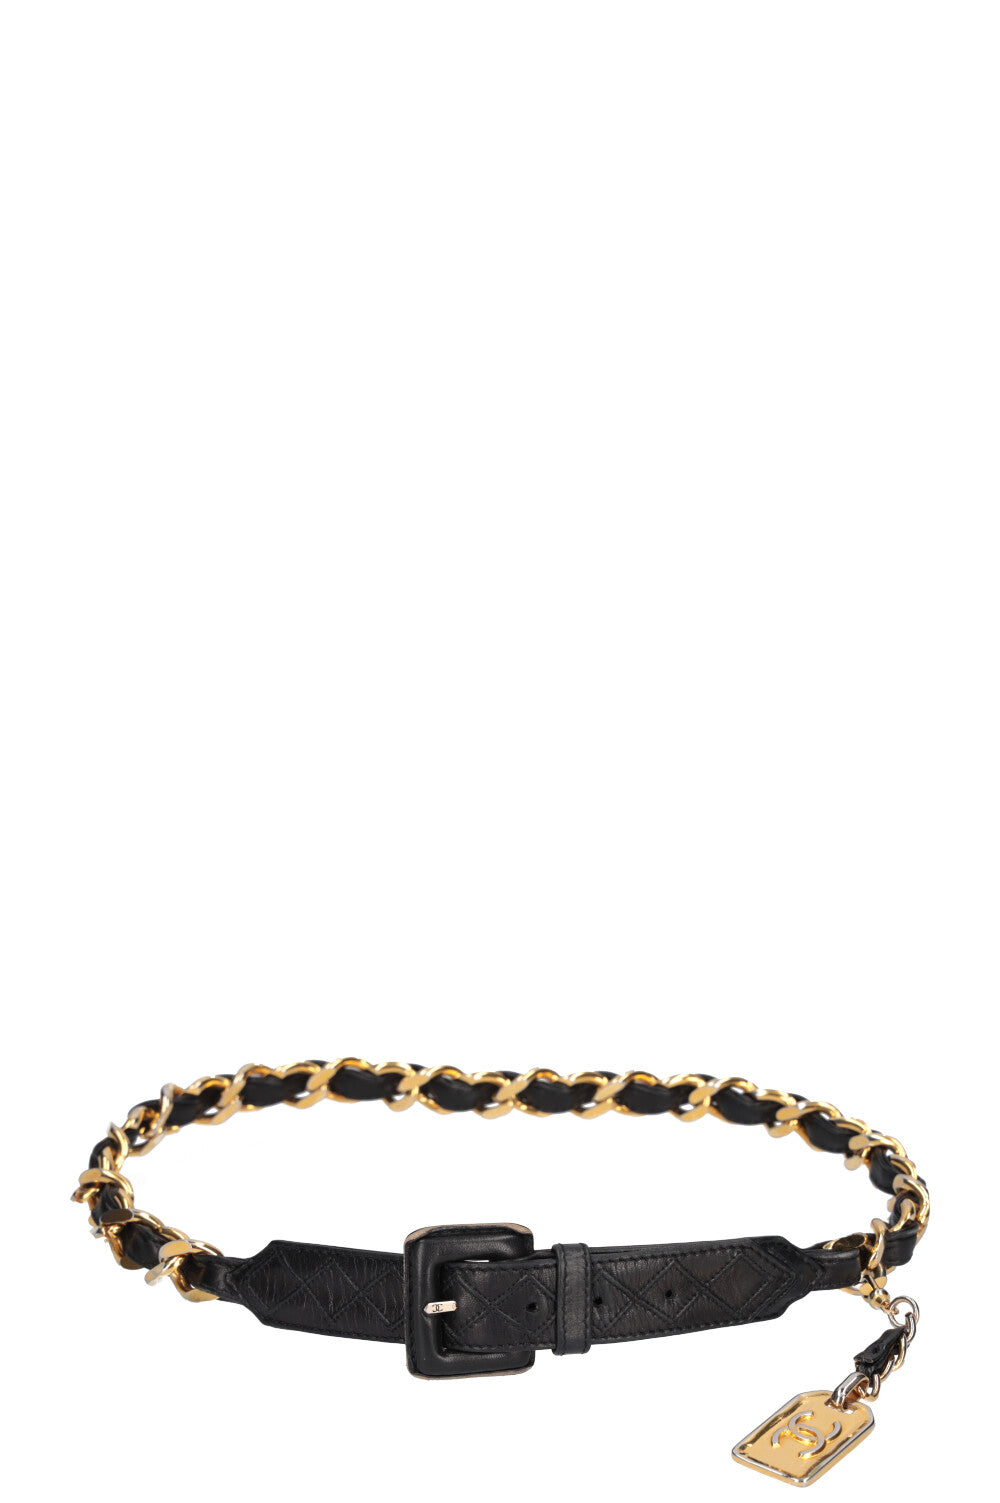 CHANEL Chain Belt with Tag Black